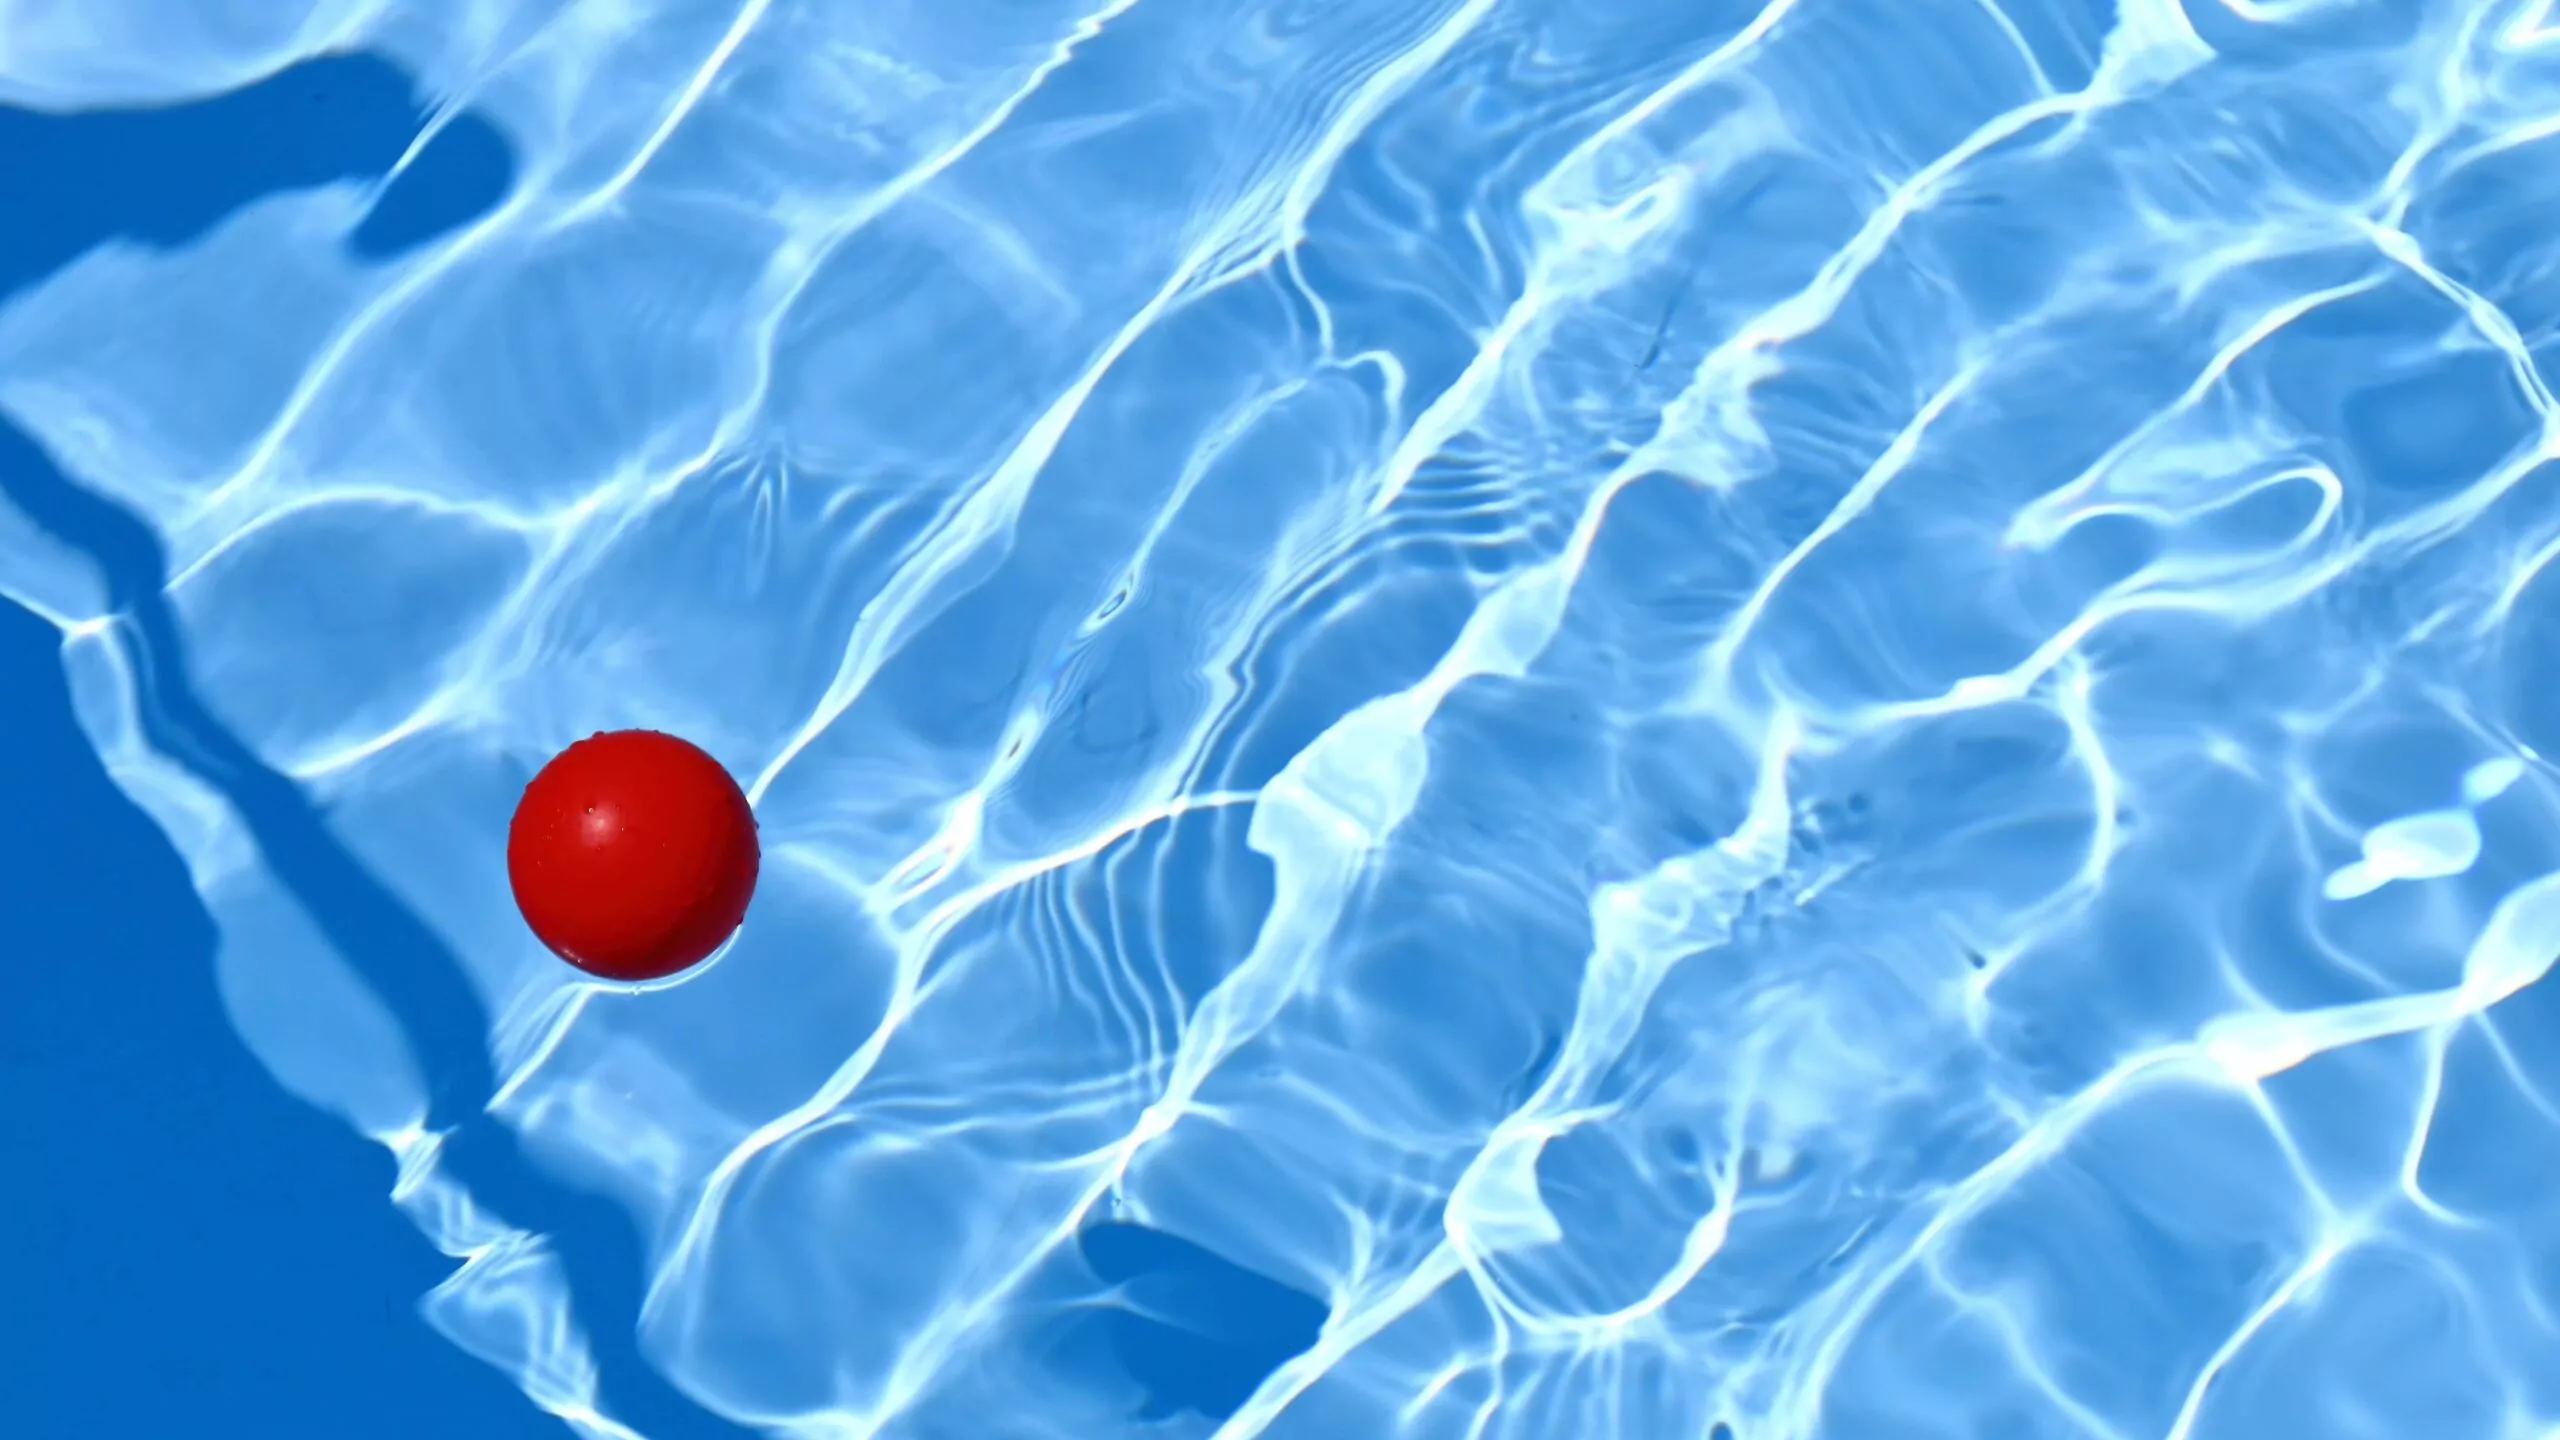 Red ball in a blue swimming pool